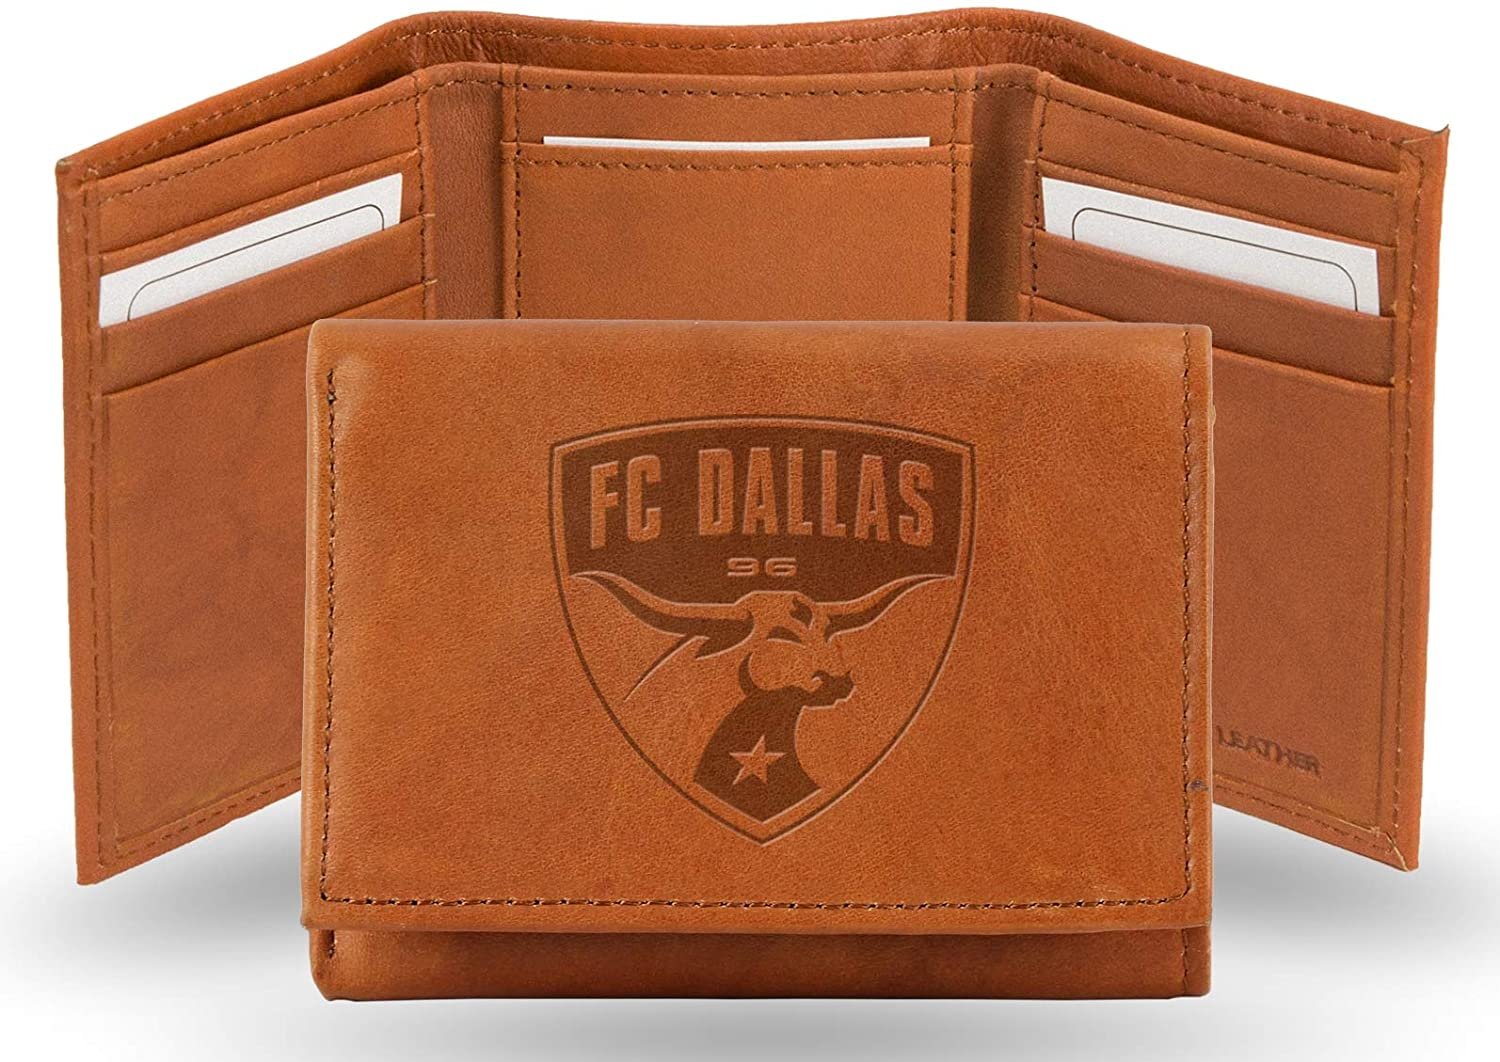 FC Dallas Premium Brown Leather Wallet, Trifold, Embossed Laser Engraved MLS Soccer